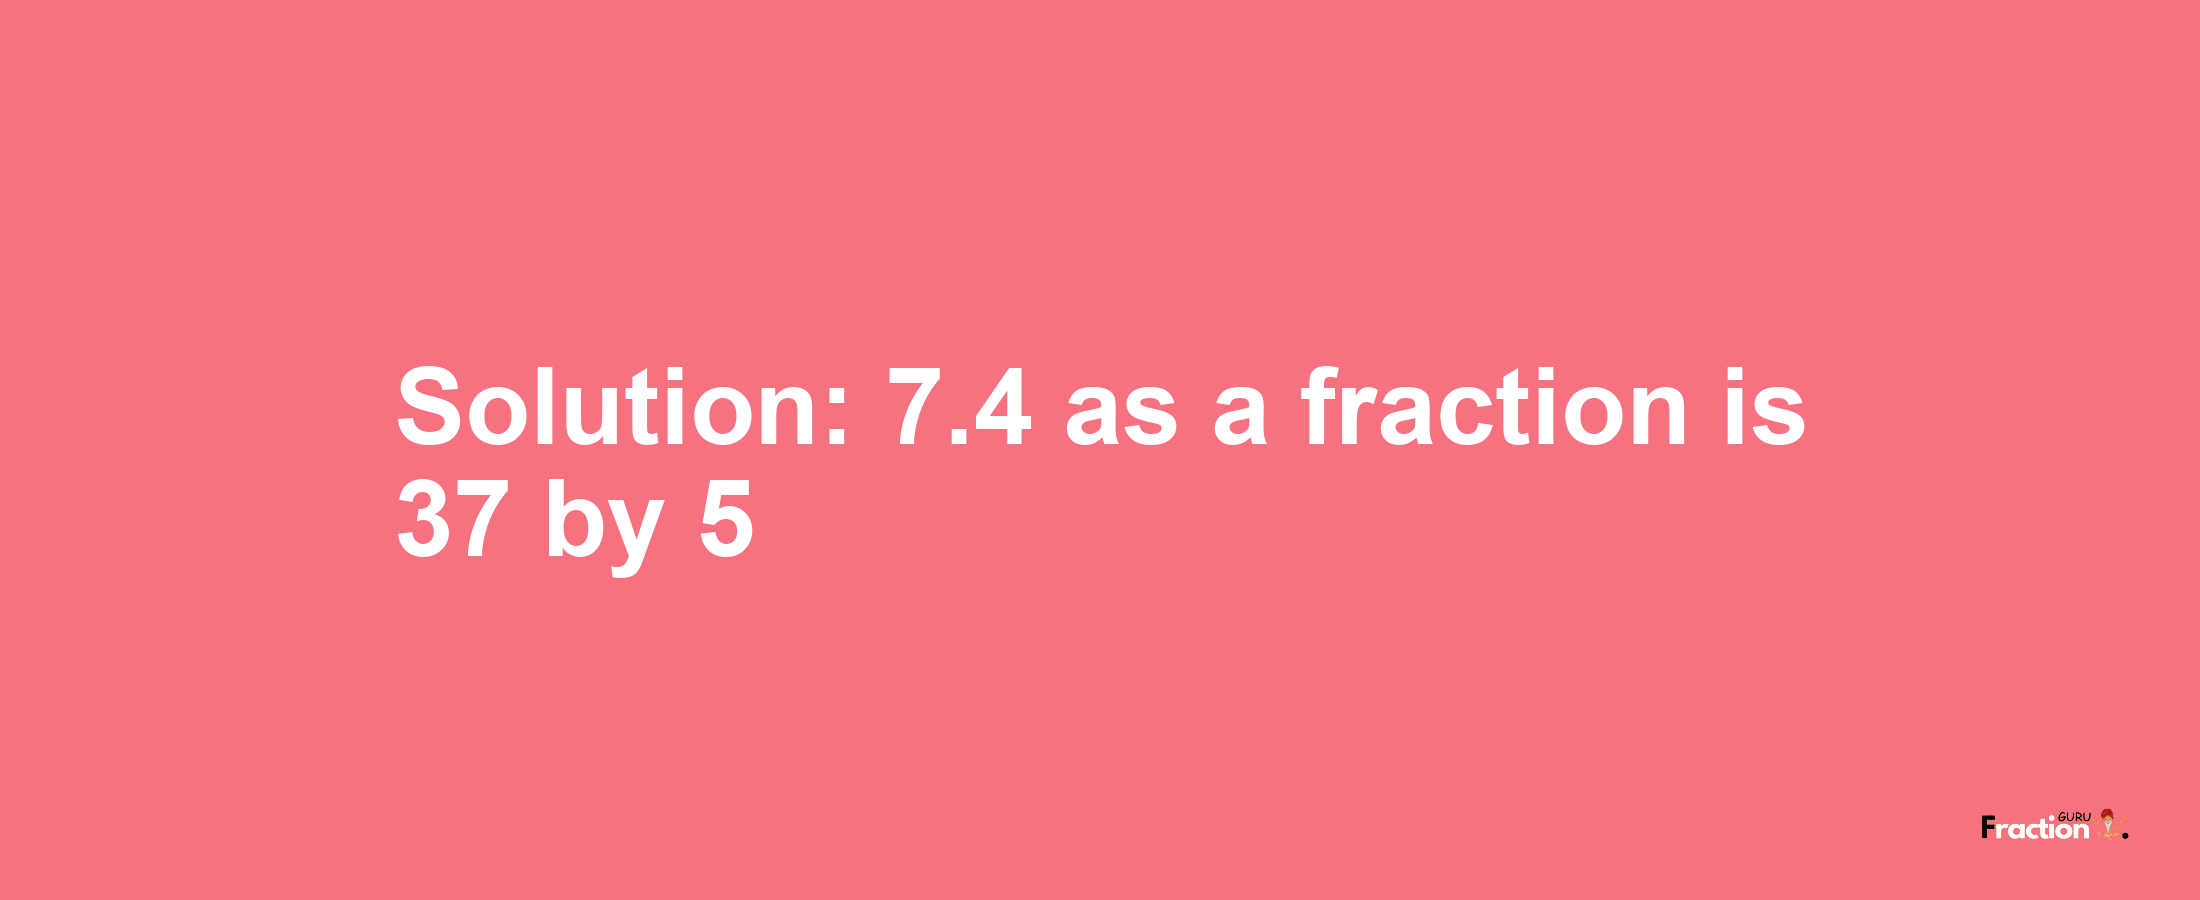 Solution:7.4 as a fraction is 37/5